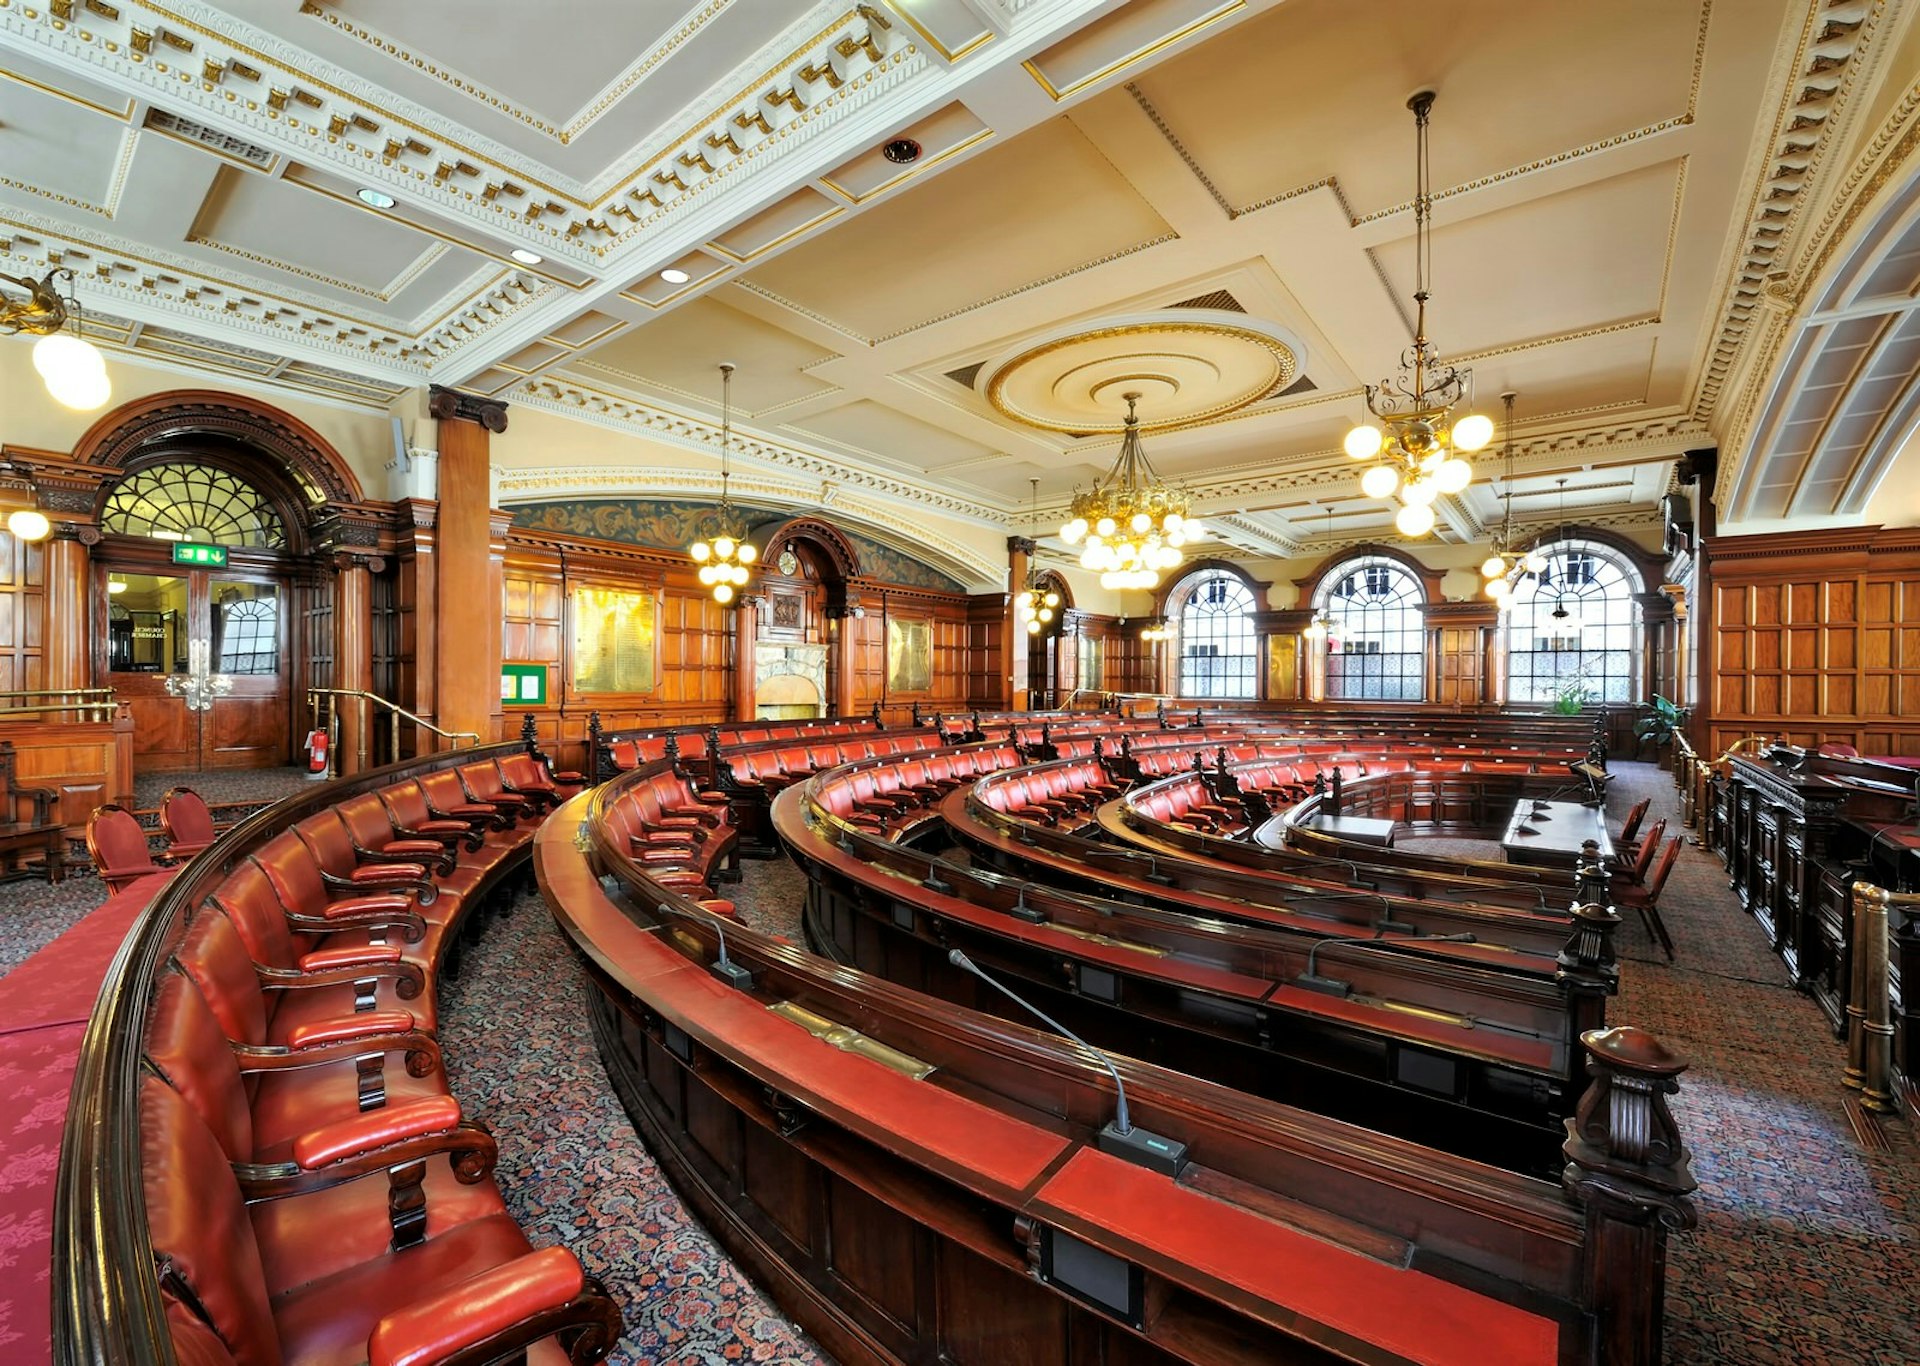 Liverpool Town Hall interior complete with curved rows of red leather seats, dark wood panelled walls and chandeliers 